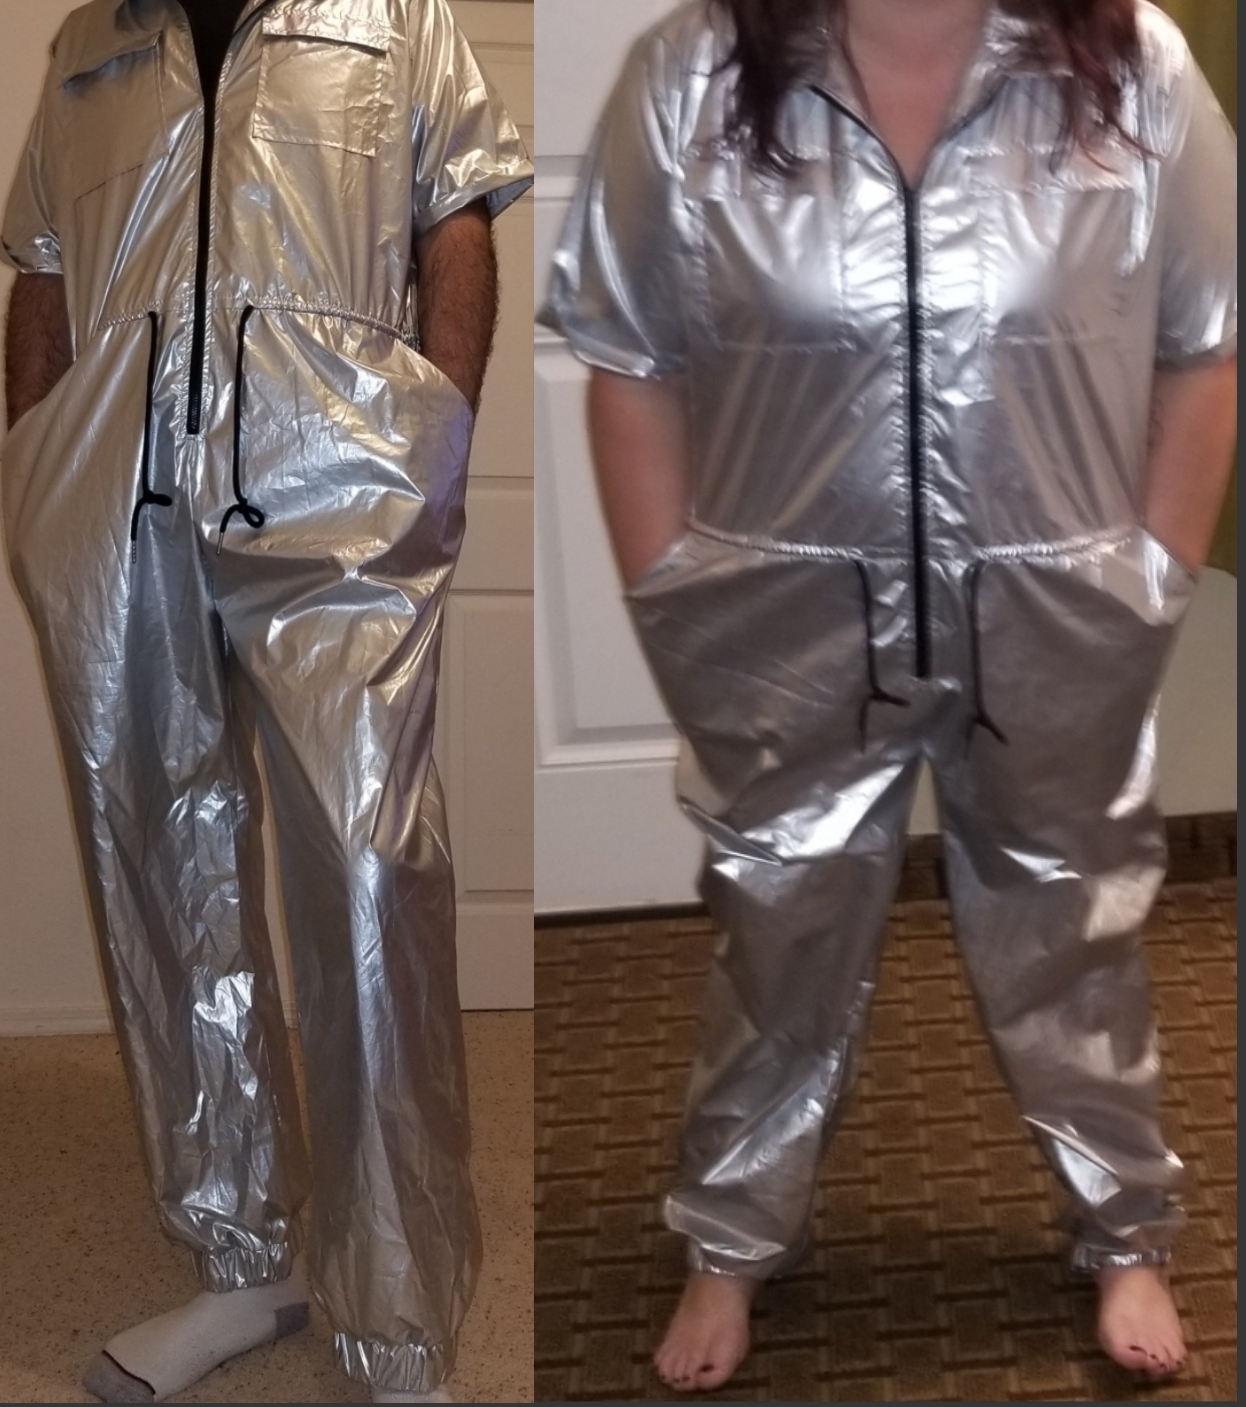 Matching jumpsuit time